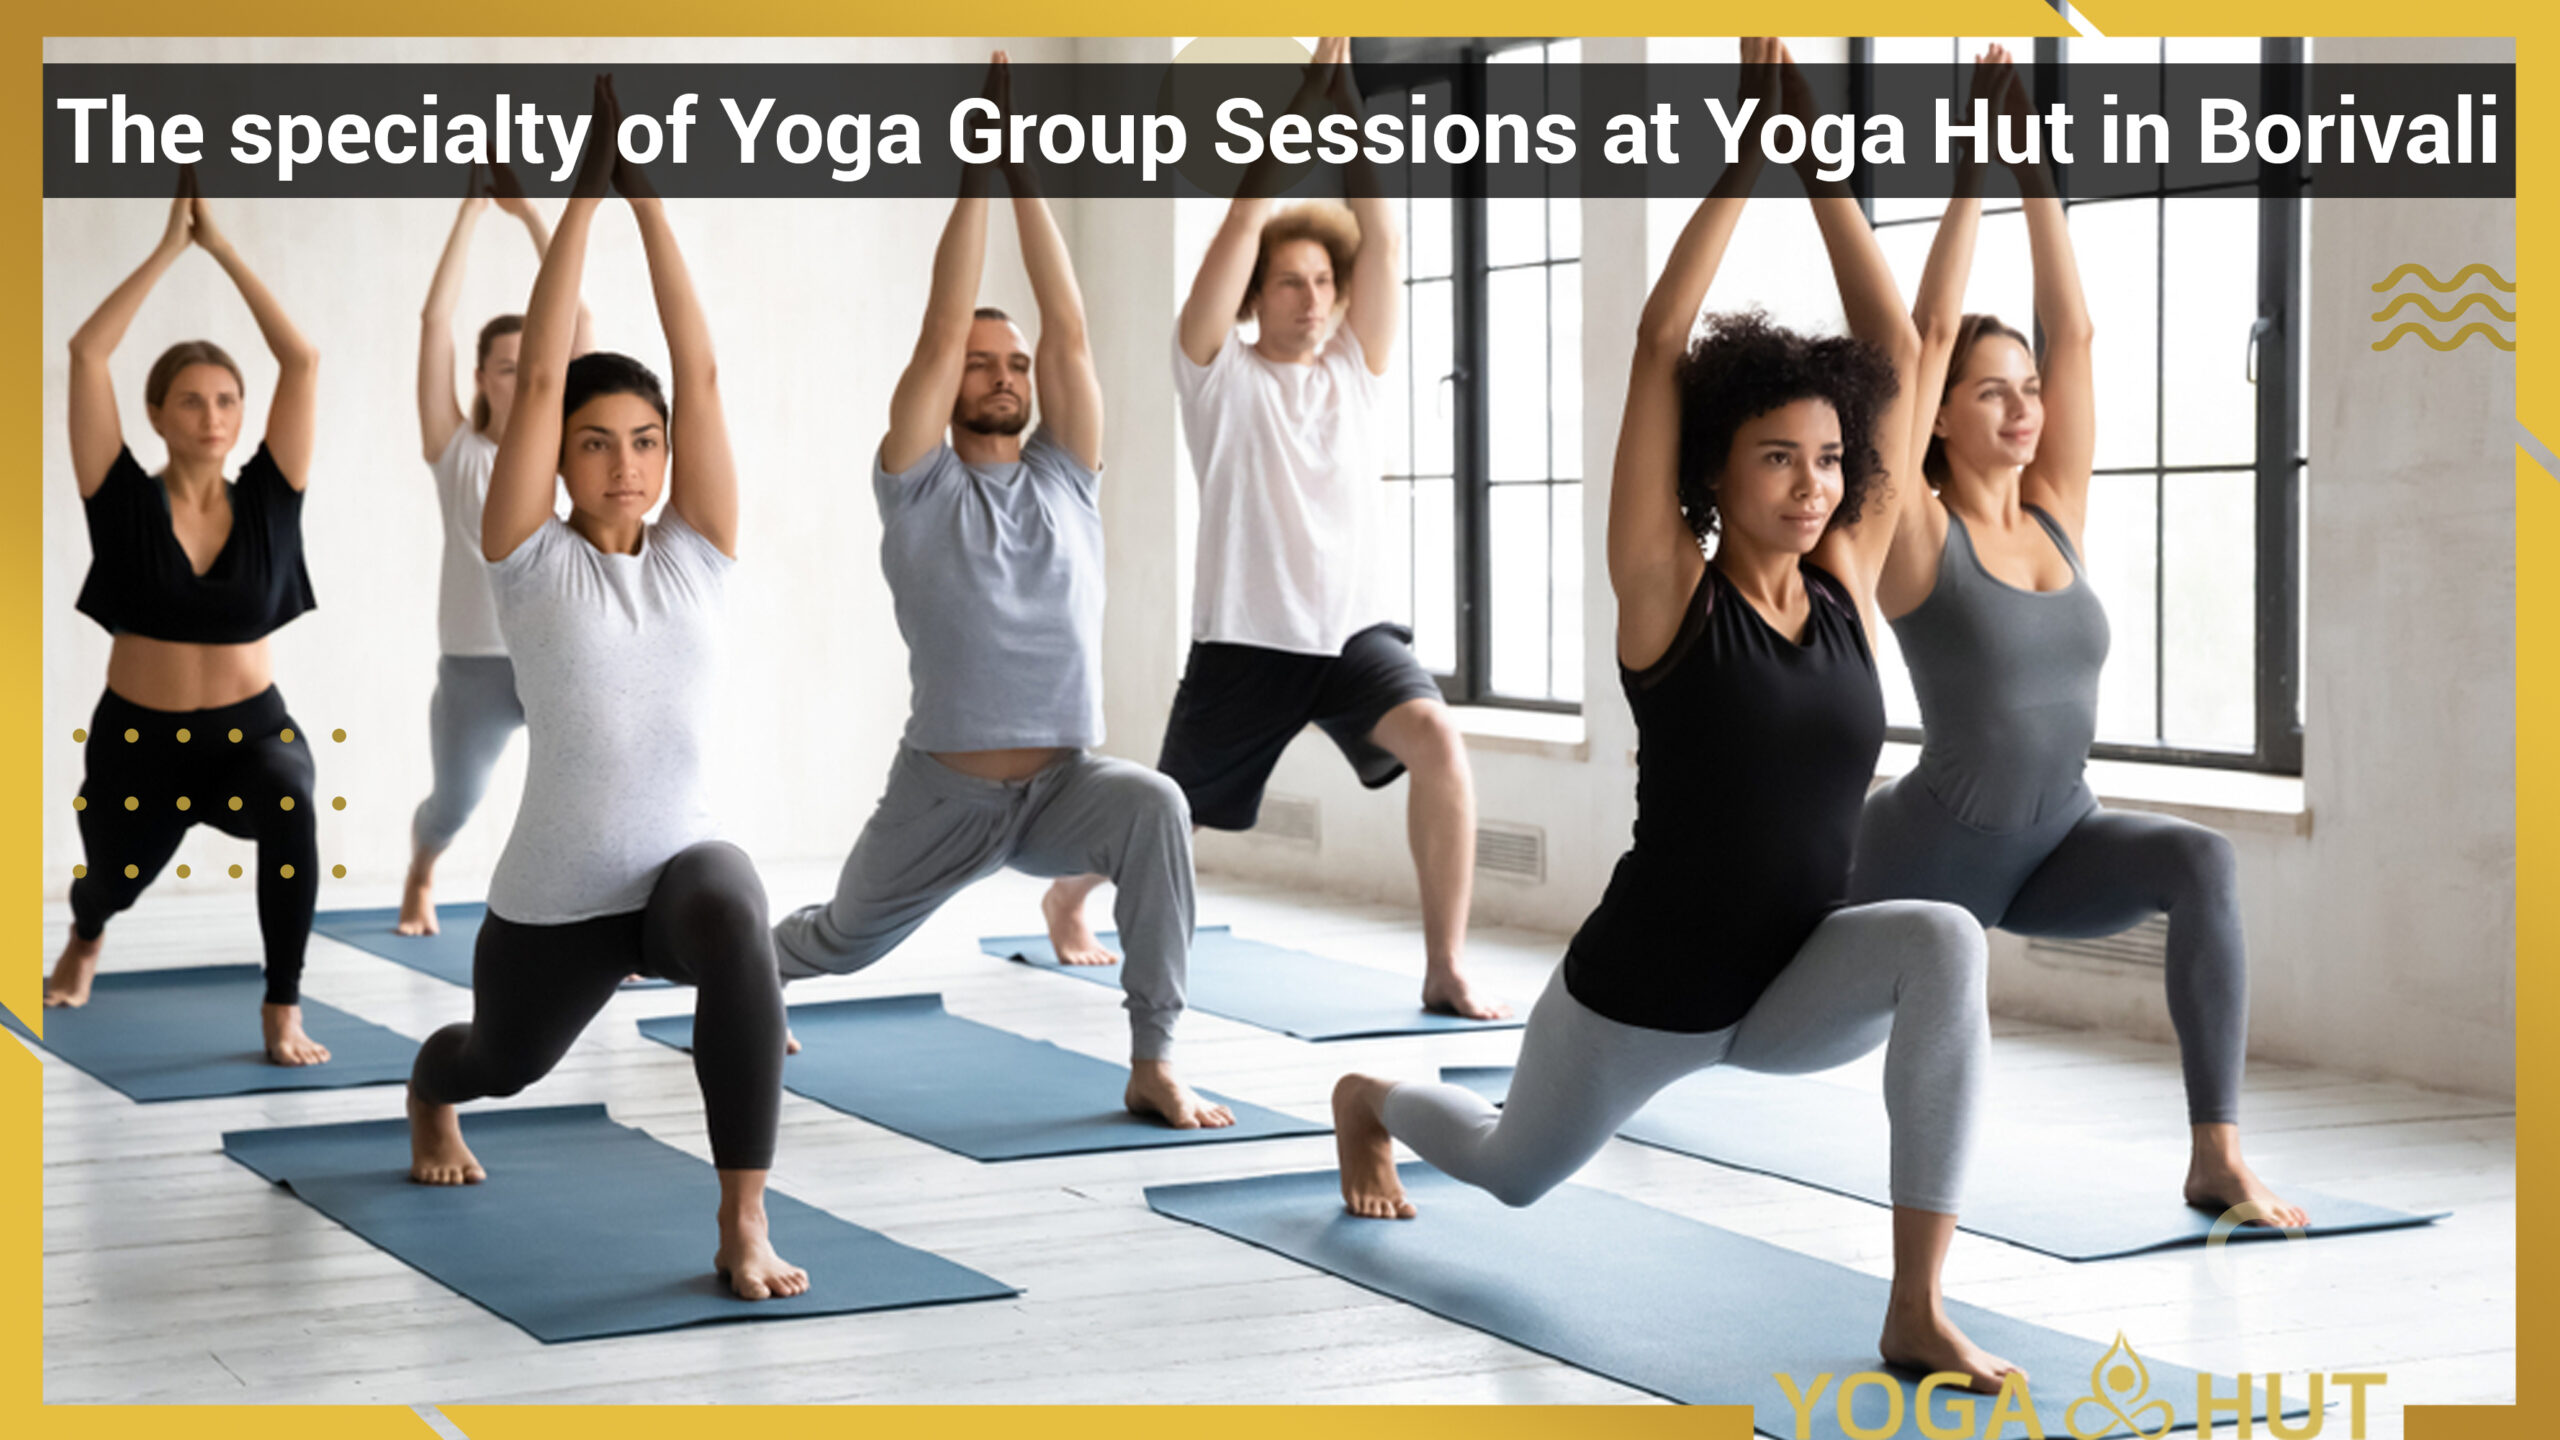 The specialty of Yoga Group Sessions at Yoga Hut in Borivali